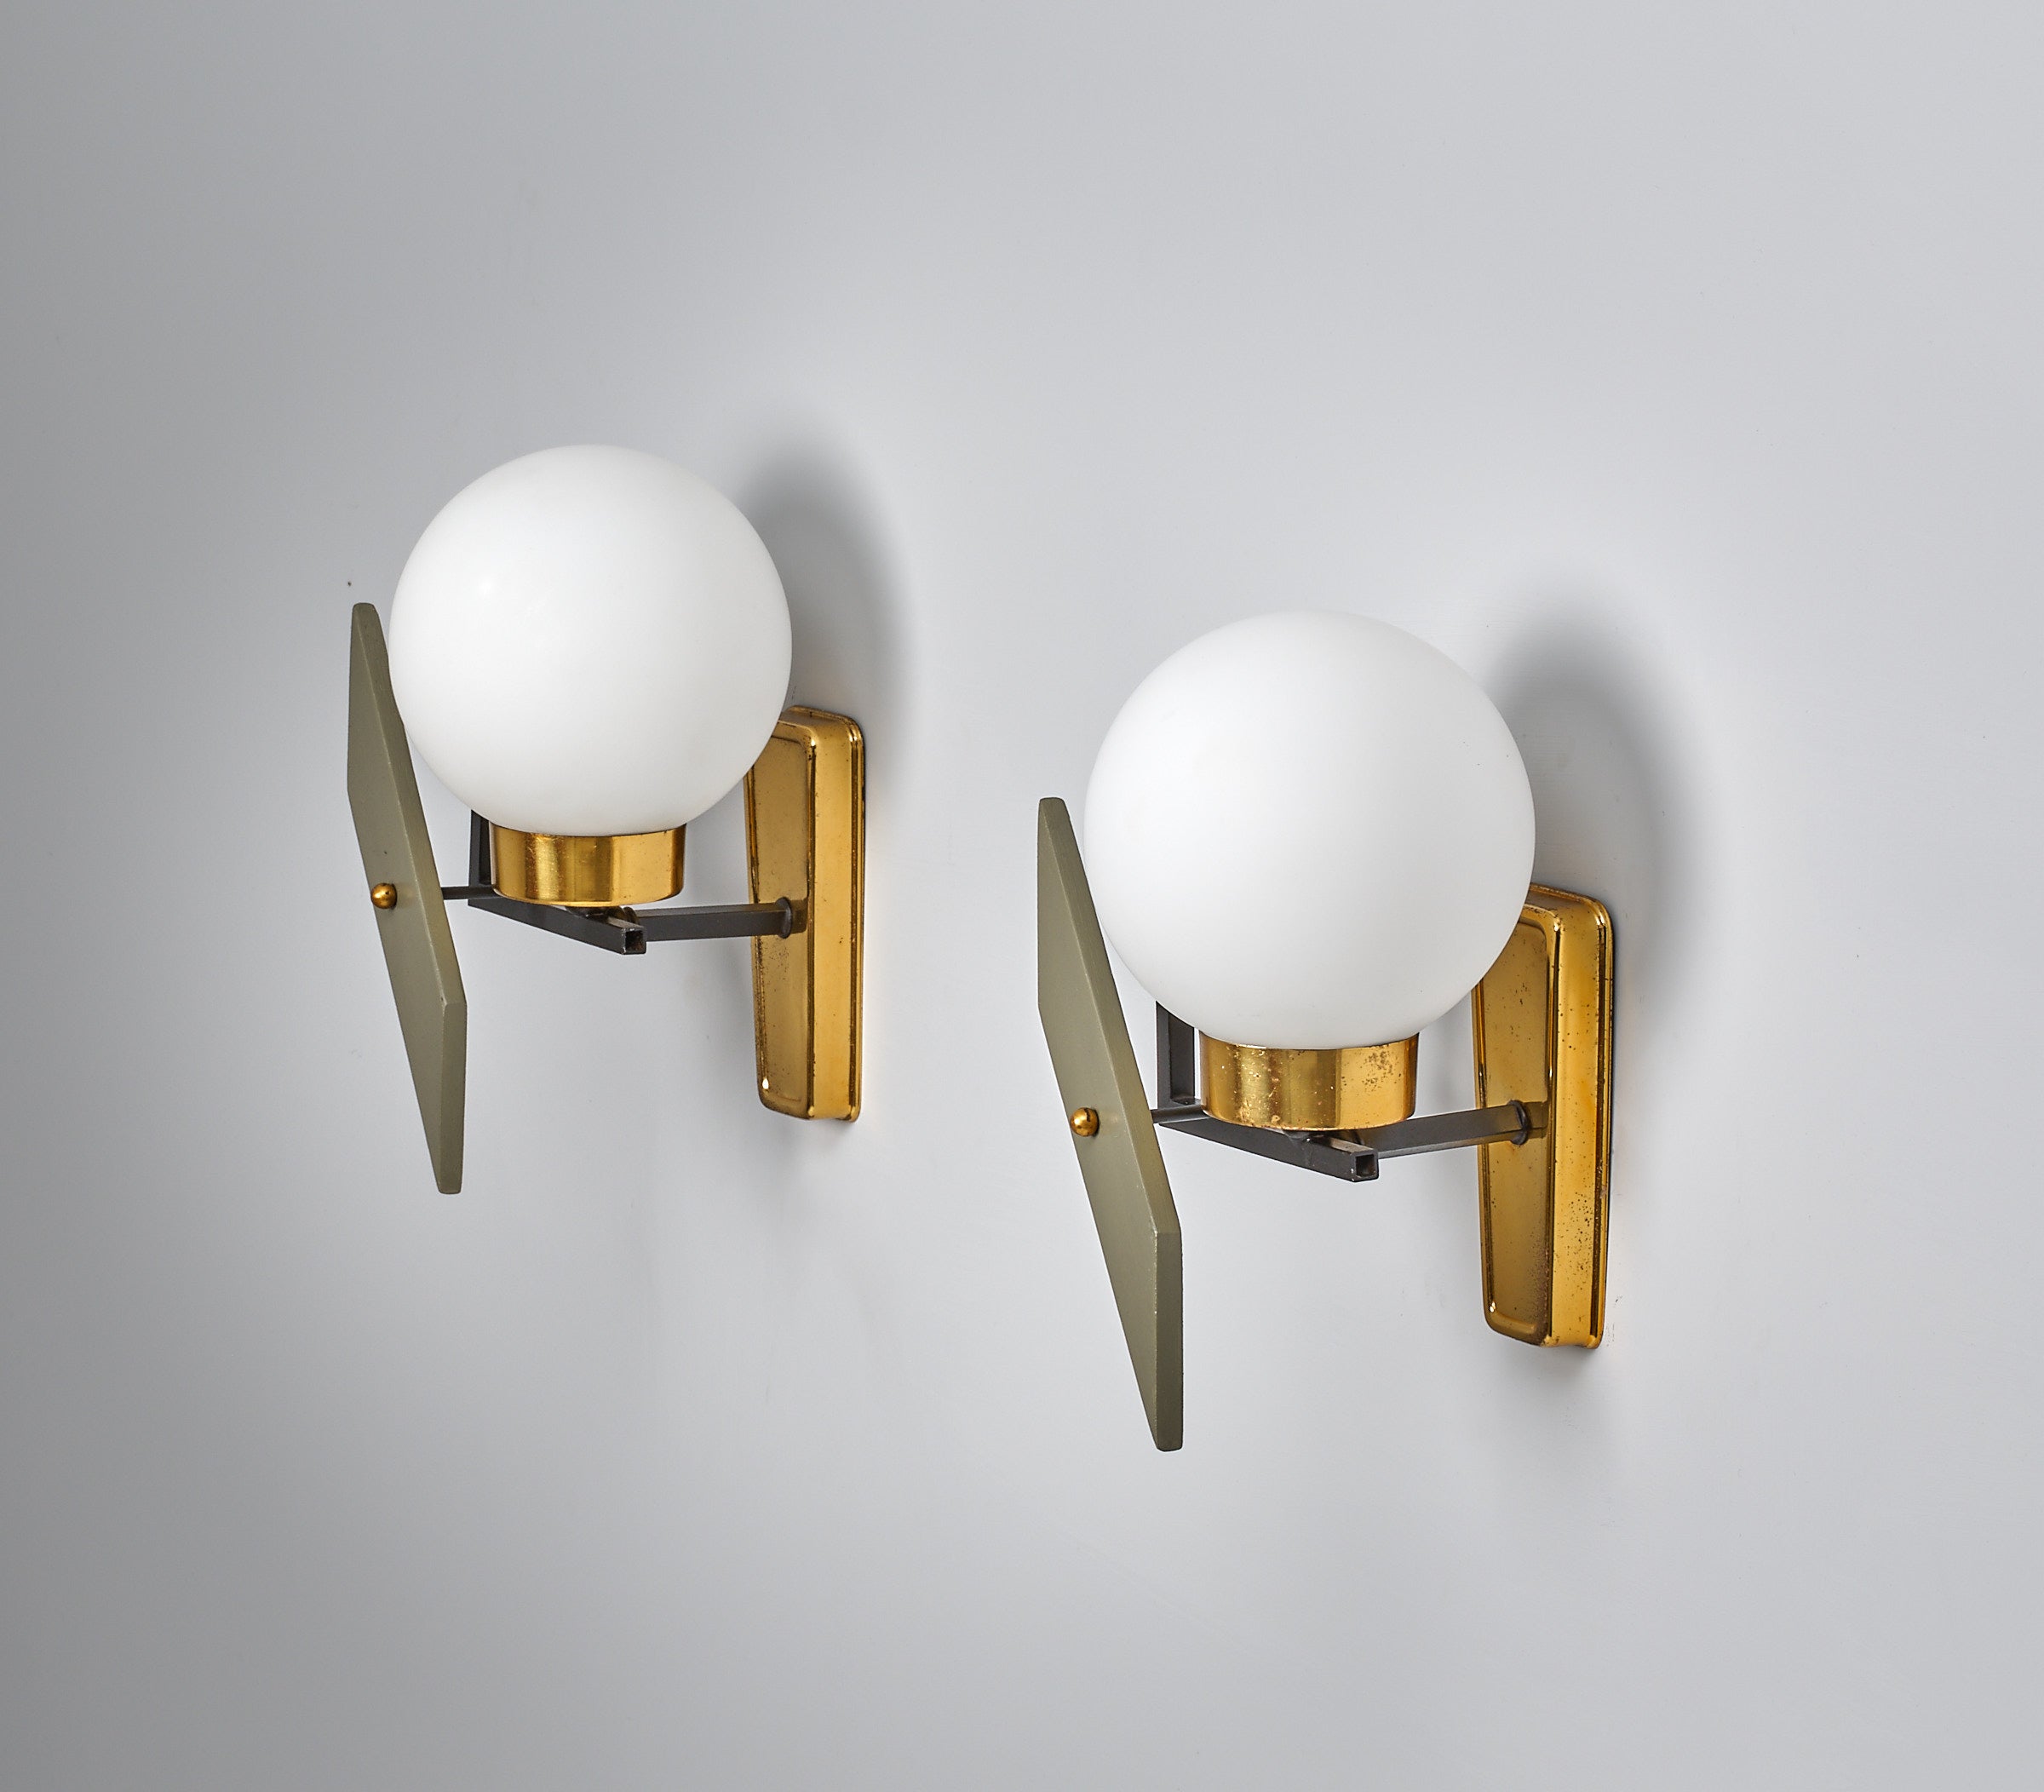 Presenting an  exquisite pair of wall sconces, a testament to iconic Italian design from the 1950s. Crafted with precision, these lamps embody elegance and sophistication. The modern design features a combination of brass with a delightful patina,